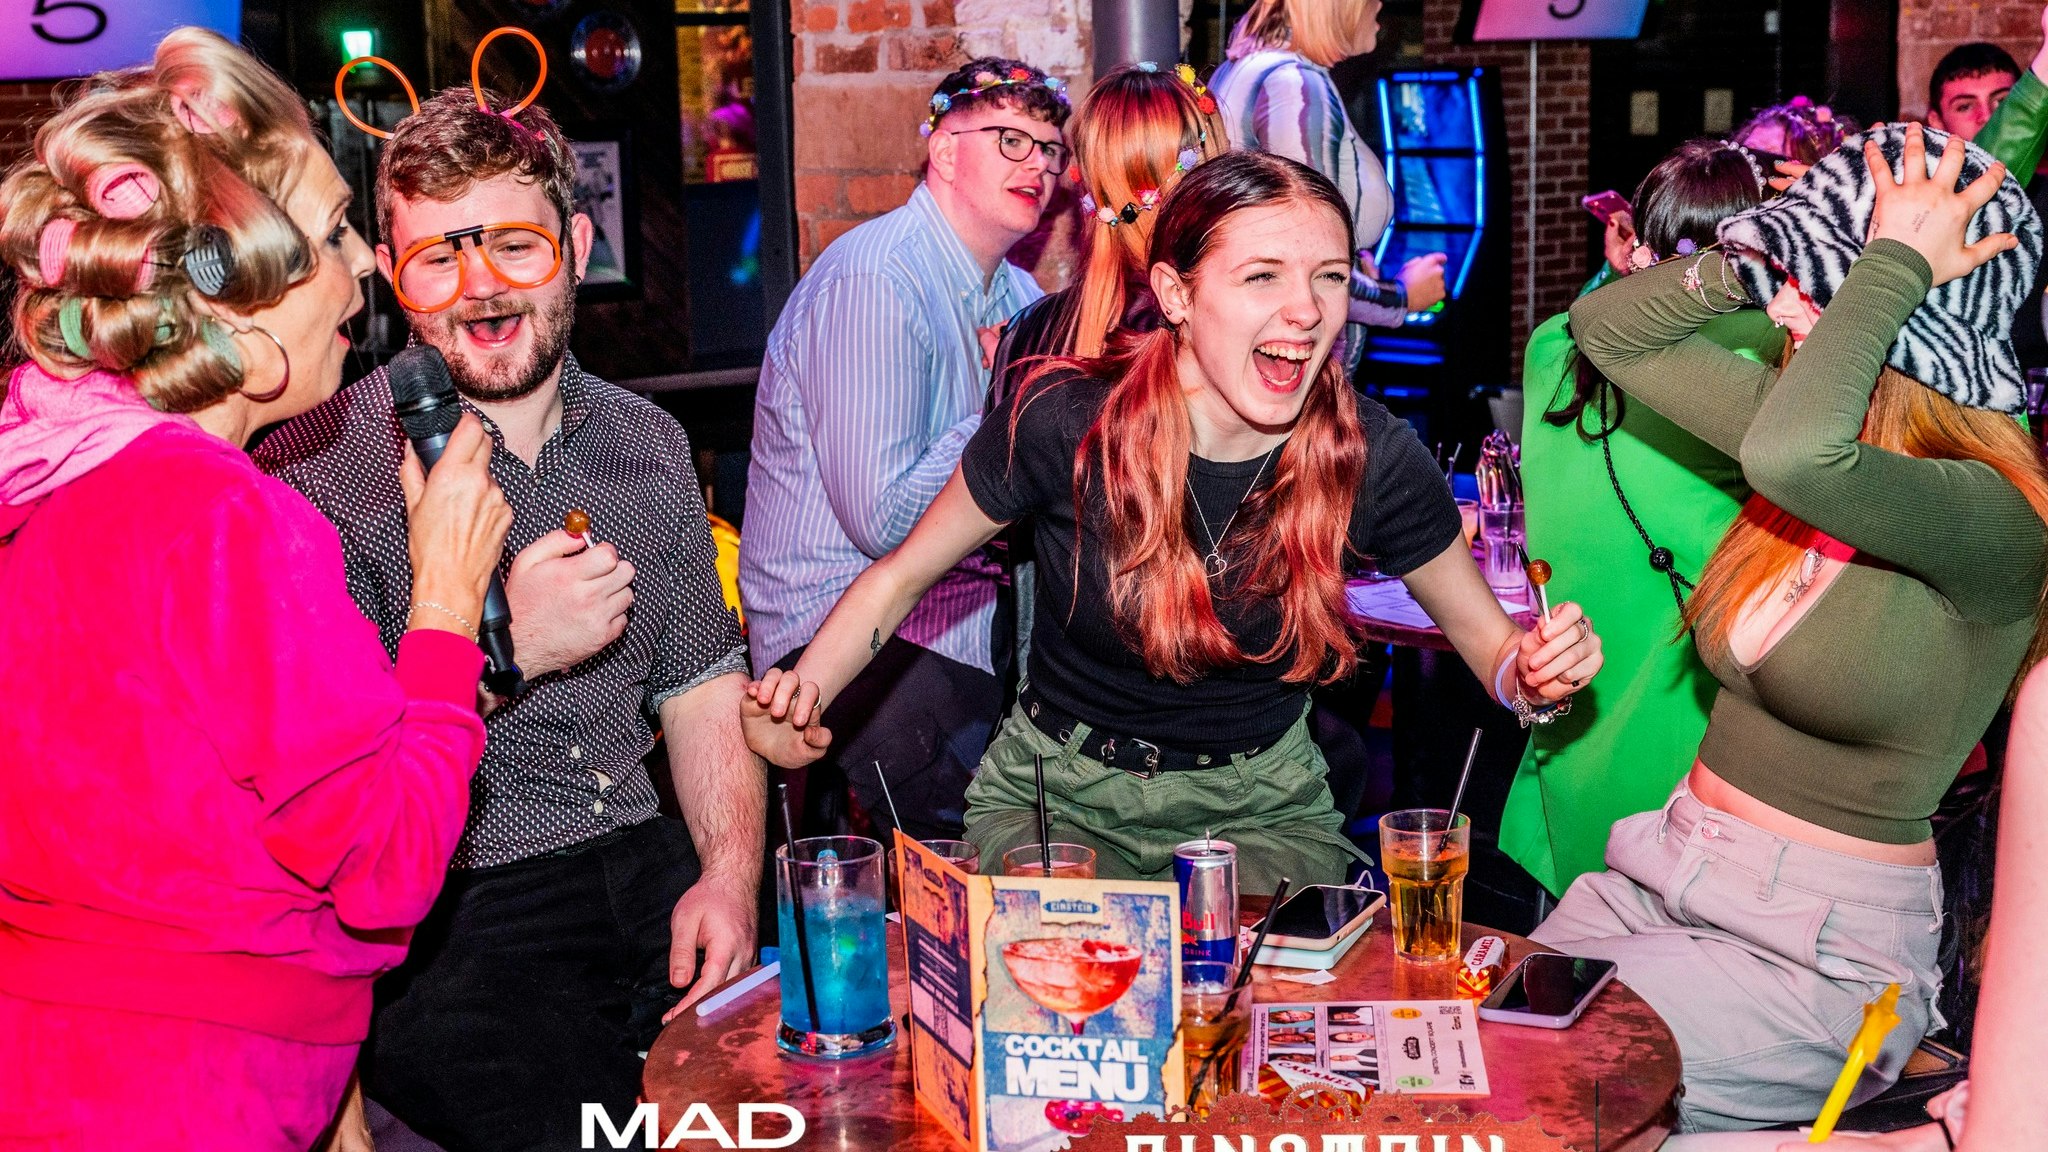 £1 MAD MONDAYS END OF TERM XMAS PARTY – YA NAN’S FAMOUS MUSIC QUIZ – followed by her HUGE AFTERPARTY –  Liverpool Concert Square’s biggest and cheapest Monday night – Win Cash! £££ PLUS… ANOTHER HARRY STYLES CUTOUTS TO WIN!